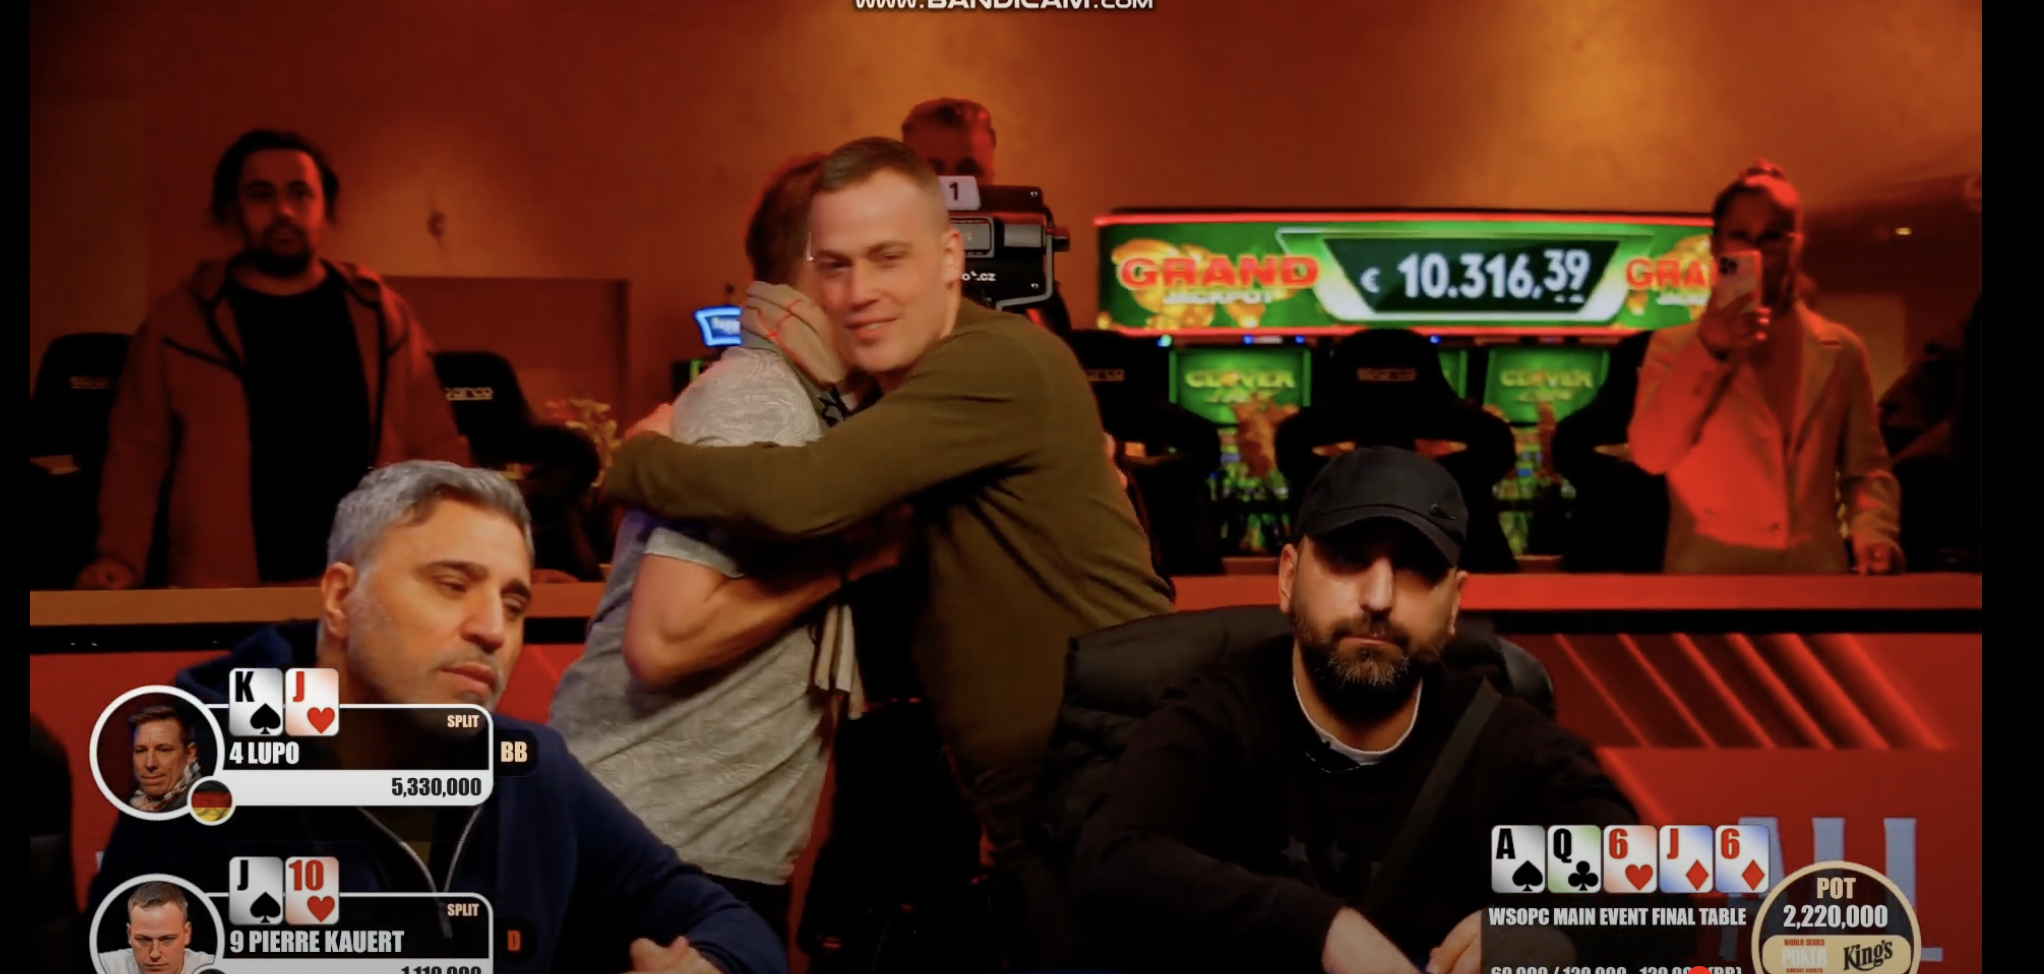 Mistake at WSOPC Final Table Eliminates Player, Casino Quickly Kills the Livestream